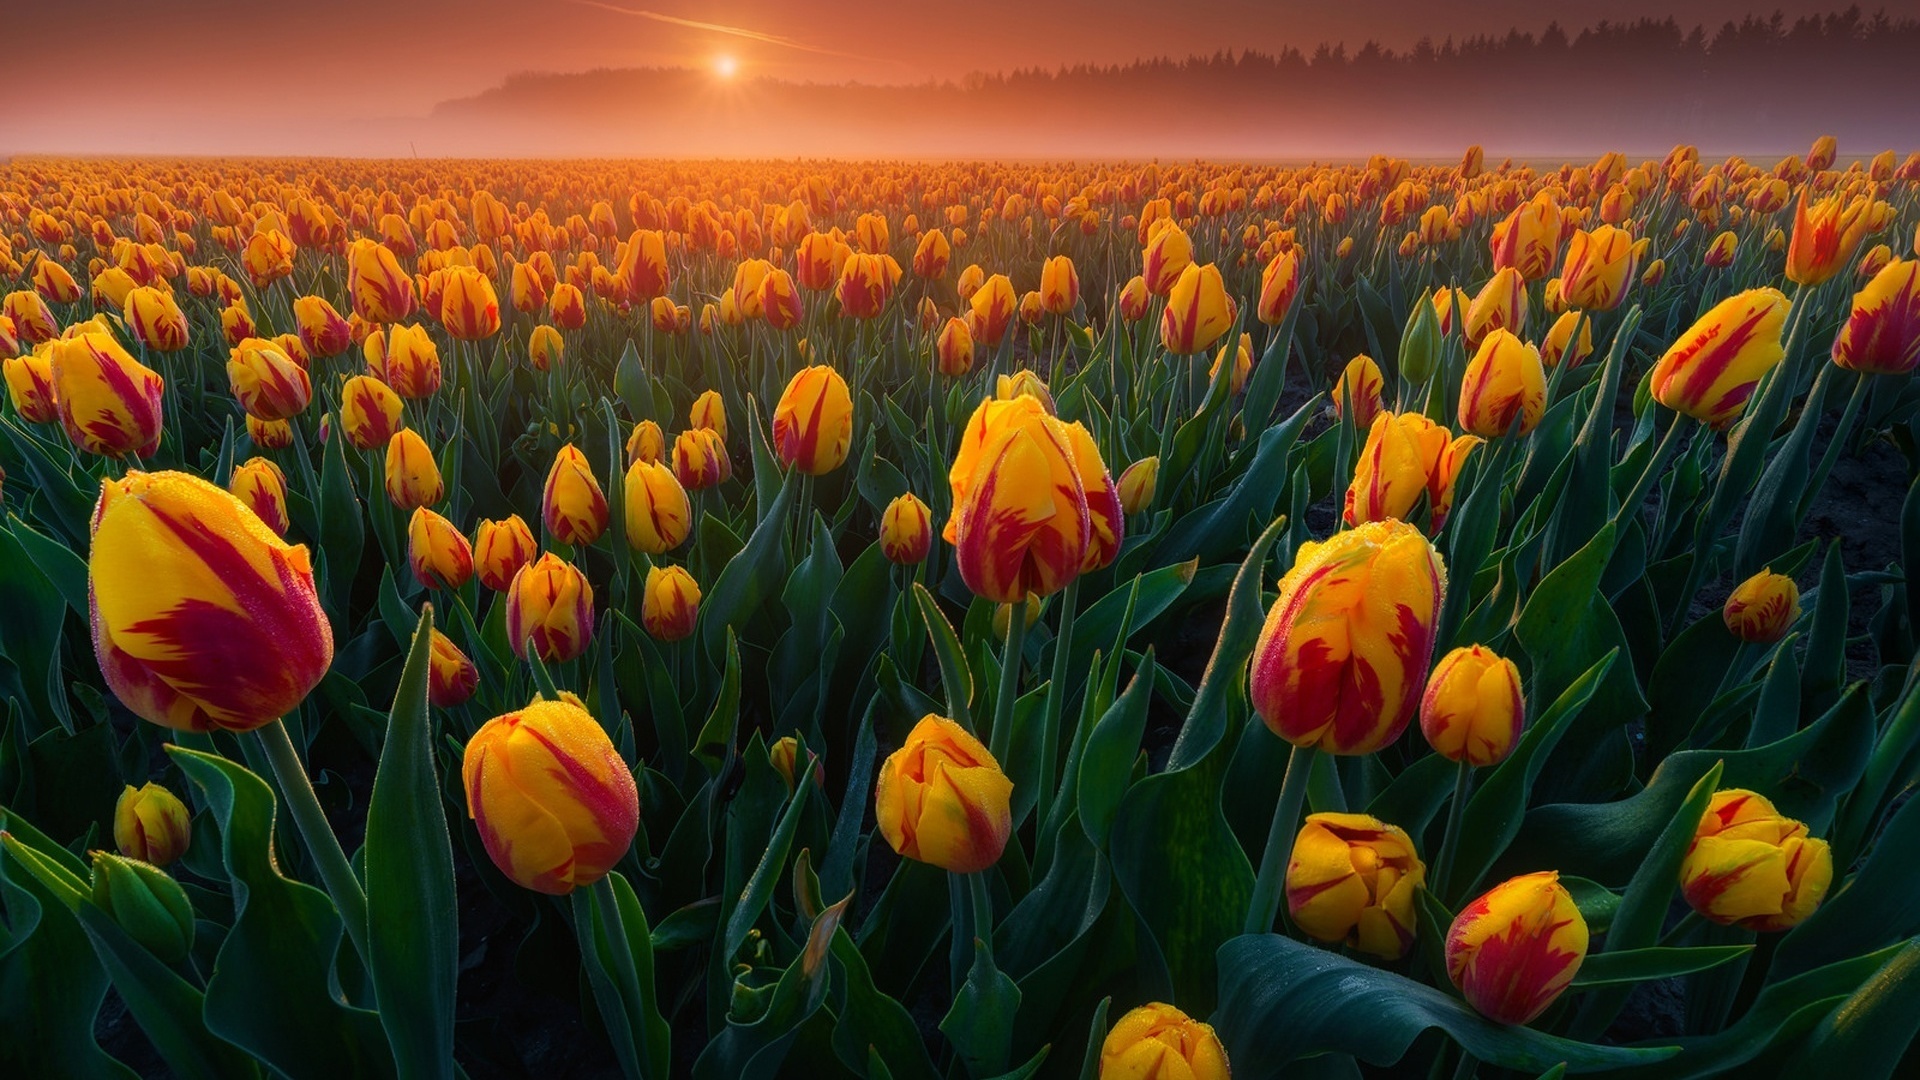 Set As Background - Netherlands Photography , HD Wallpaper & Backgrounds